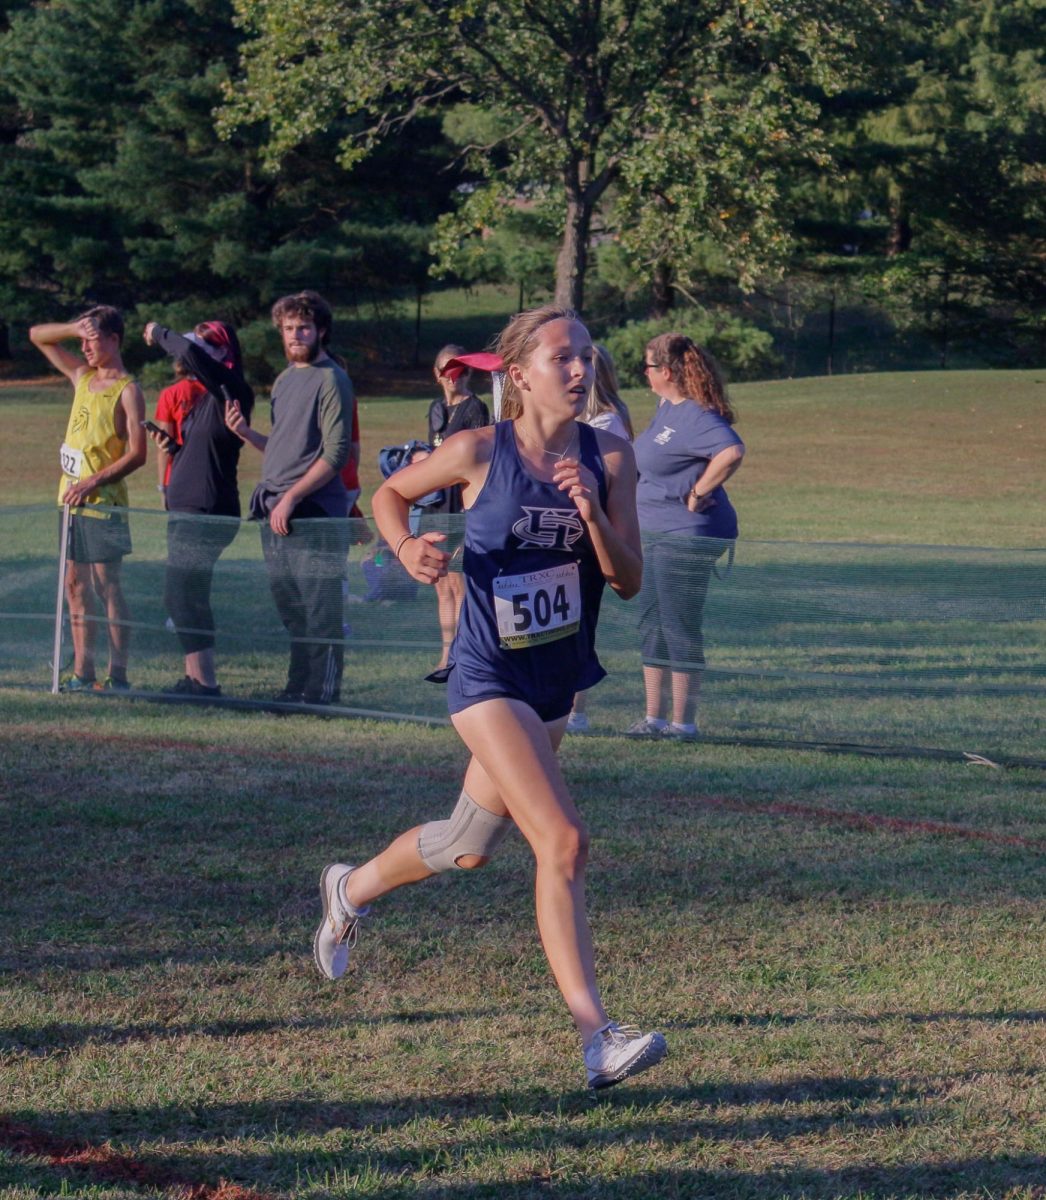 Freshman Rachael Latzel races towards the finish line in the final stretch of the race.